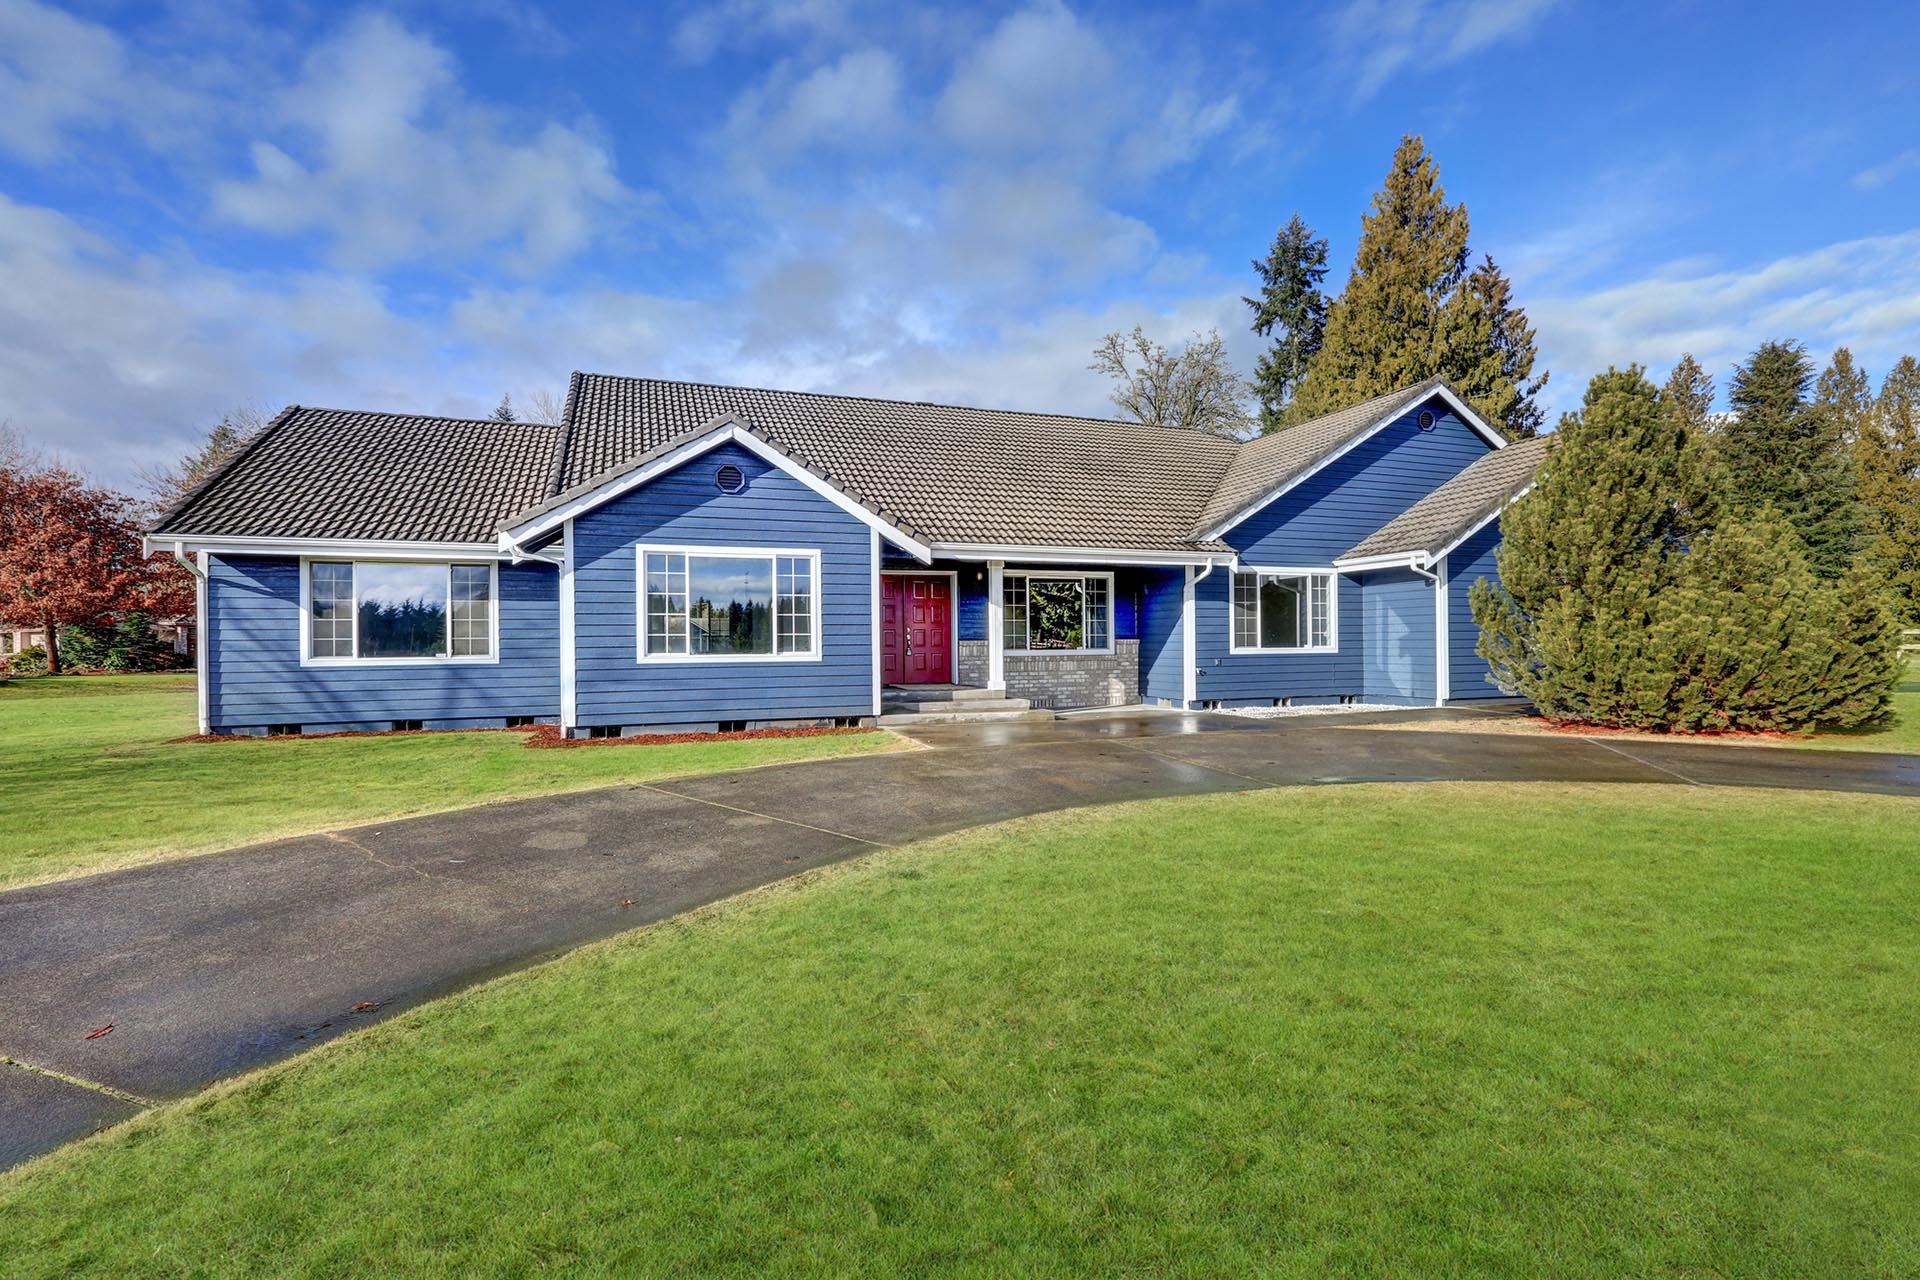 Beautiful rambler house with tile roof, blue siding, covered porch with double red front door and concrete driveway. Northwest, USA